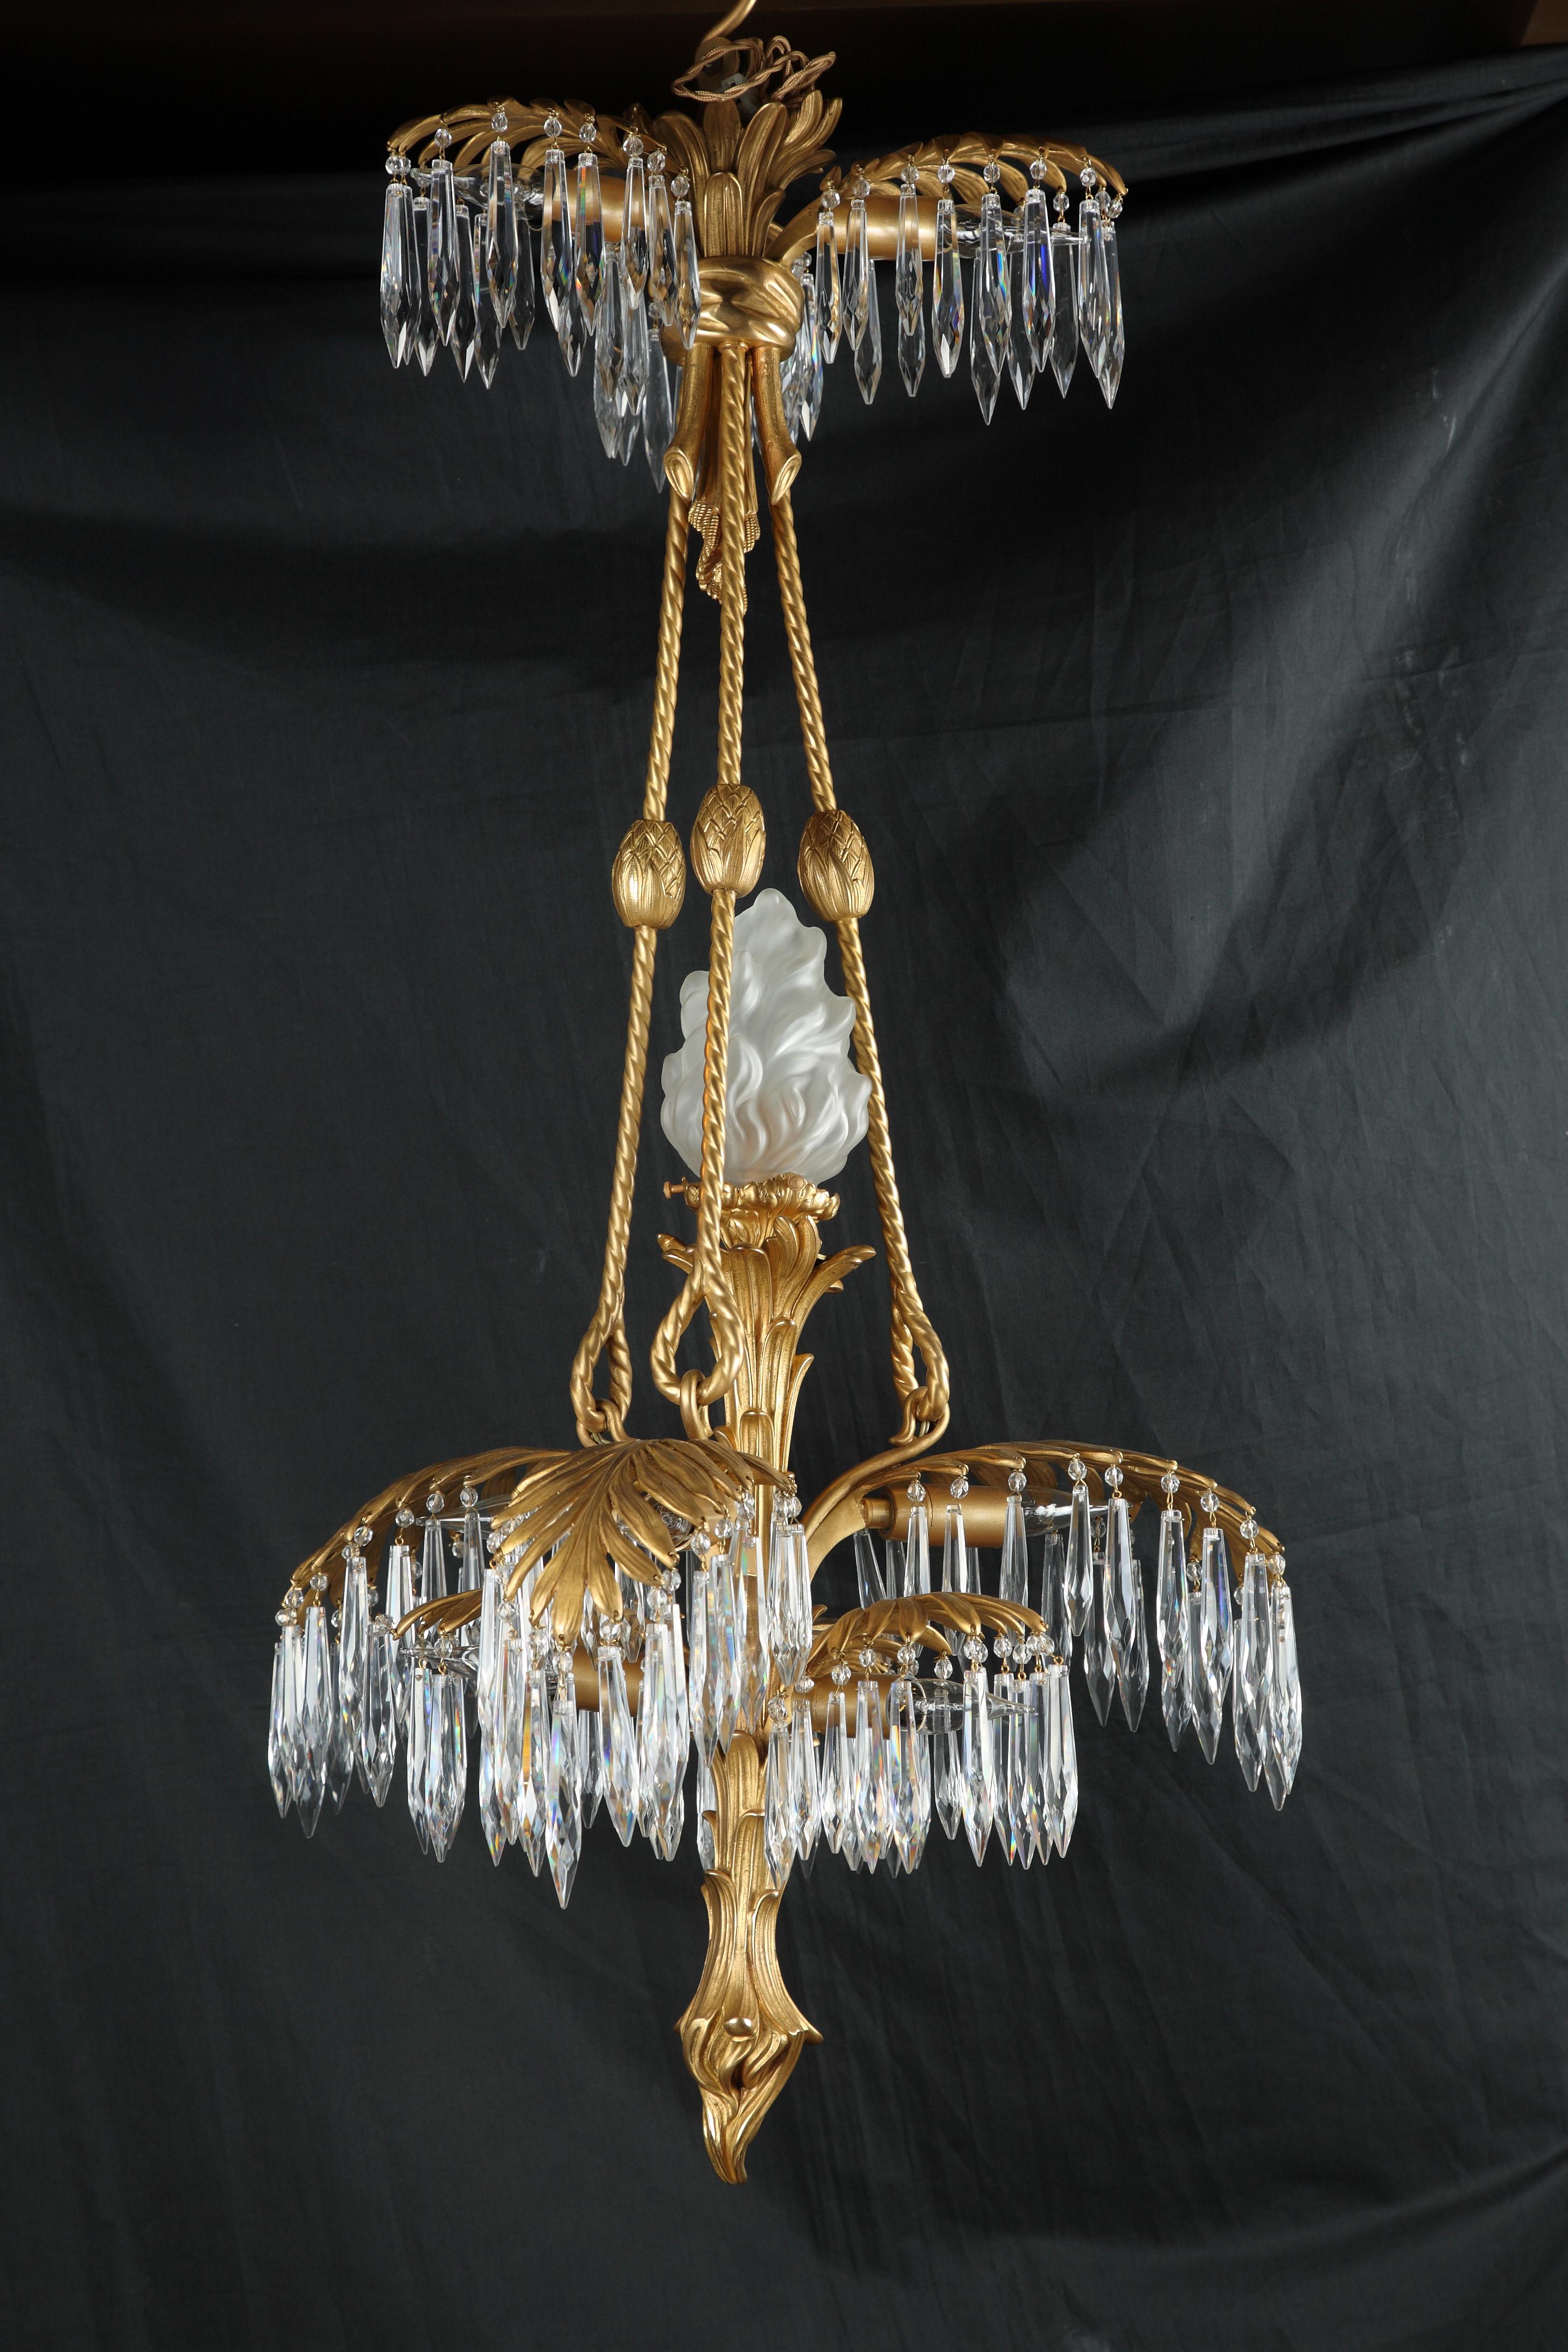 Superb gilt bronze chandelier with a palm tree shaped shaft issuing elegant leaves from which hang cut-crystal pendants and hiding nine lights on three levels connected by twisted cords. A tenth-shaped torch light adorns the center of the